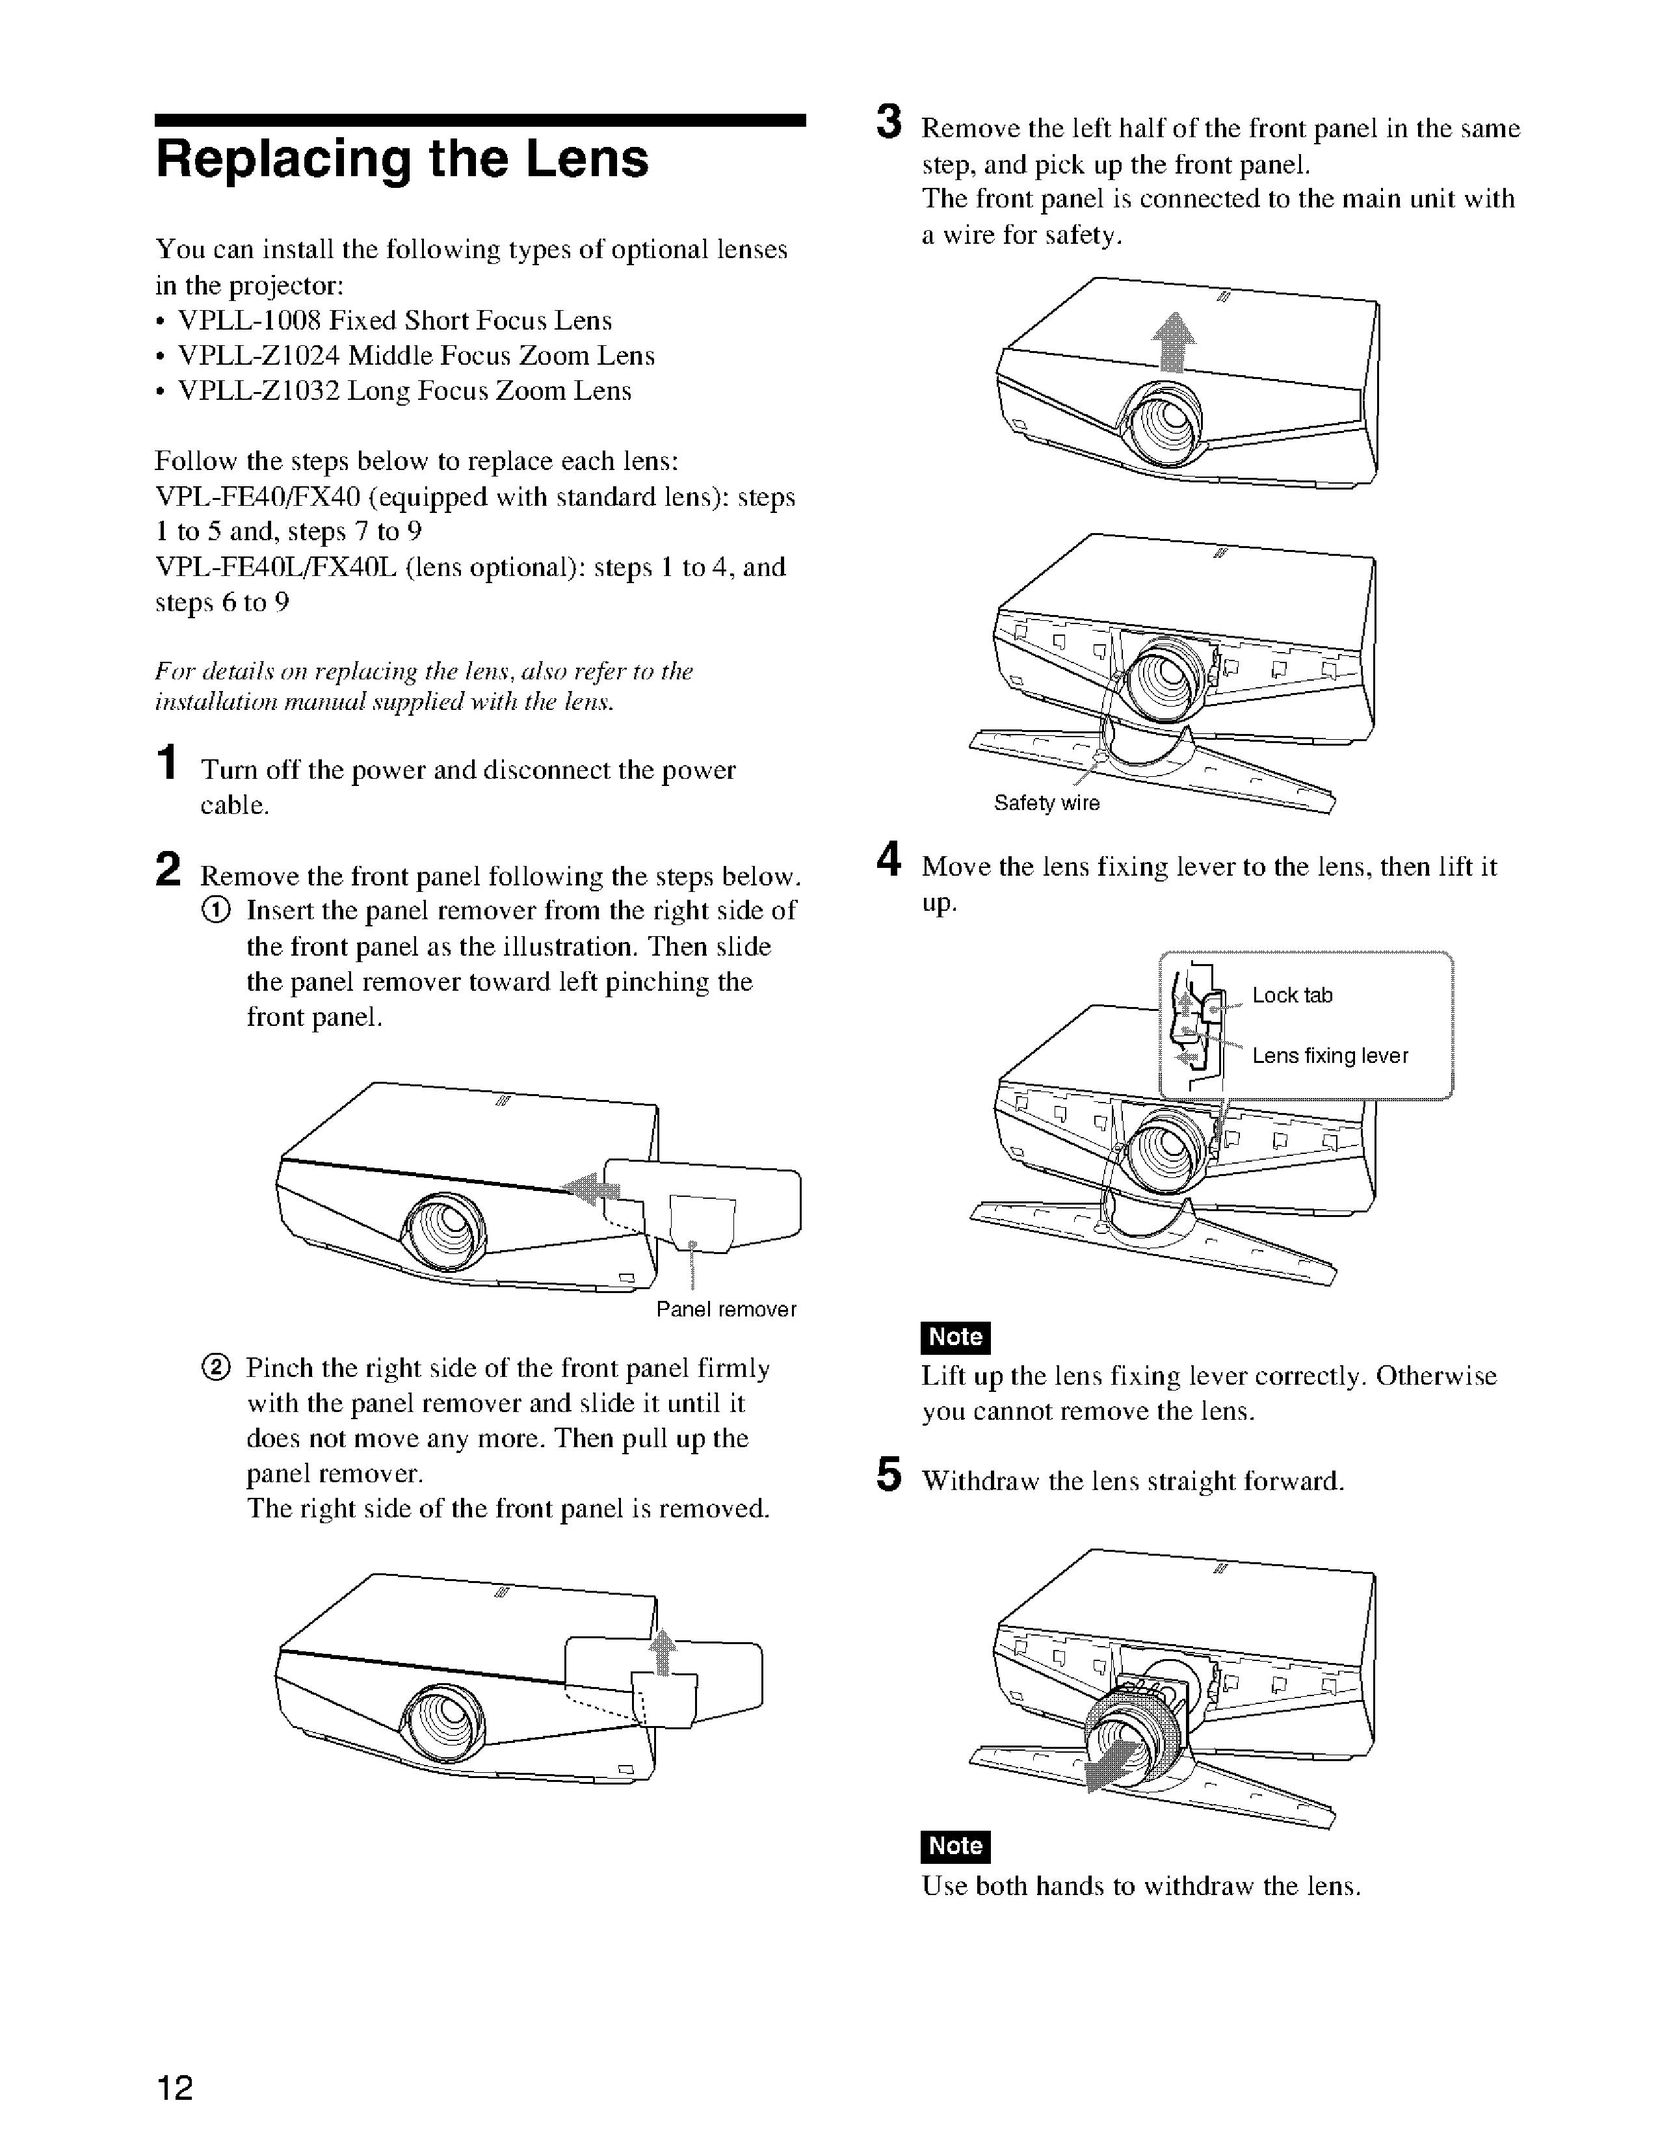 Sony VPLLZ1032 Projector Accessories User Manual